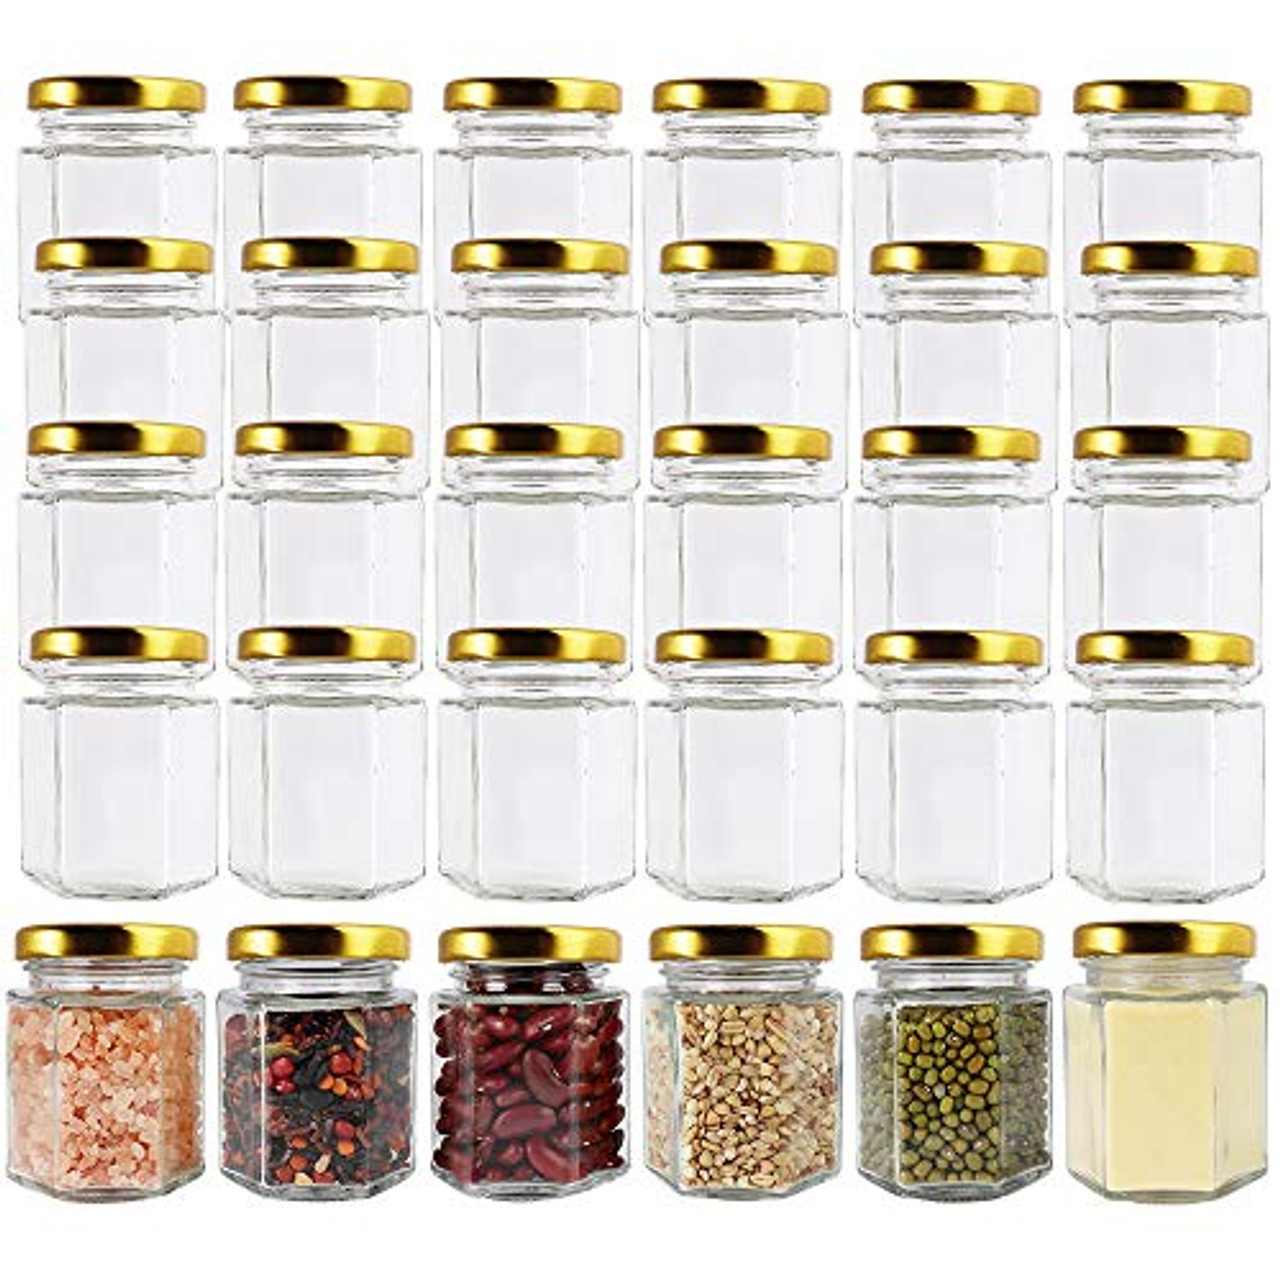 30pcs 1.5oz Hexagon Mini Glass Jars with Gold Lids, Honey Jars Small Spice  Jars Mason Jars For Herbs with 80pcs Stickers, 2pcs Brush for Spices,  Gifts, Wedding Party Favors, DIY and More